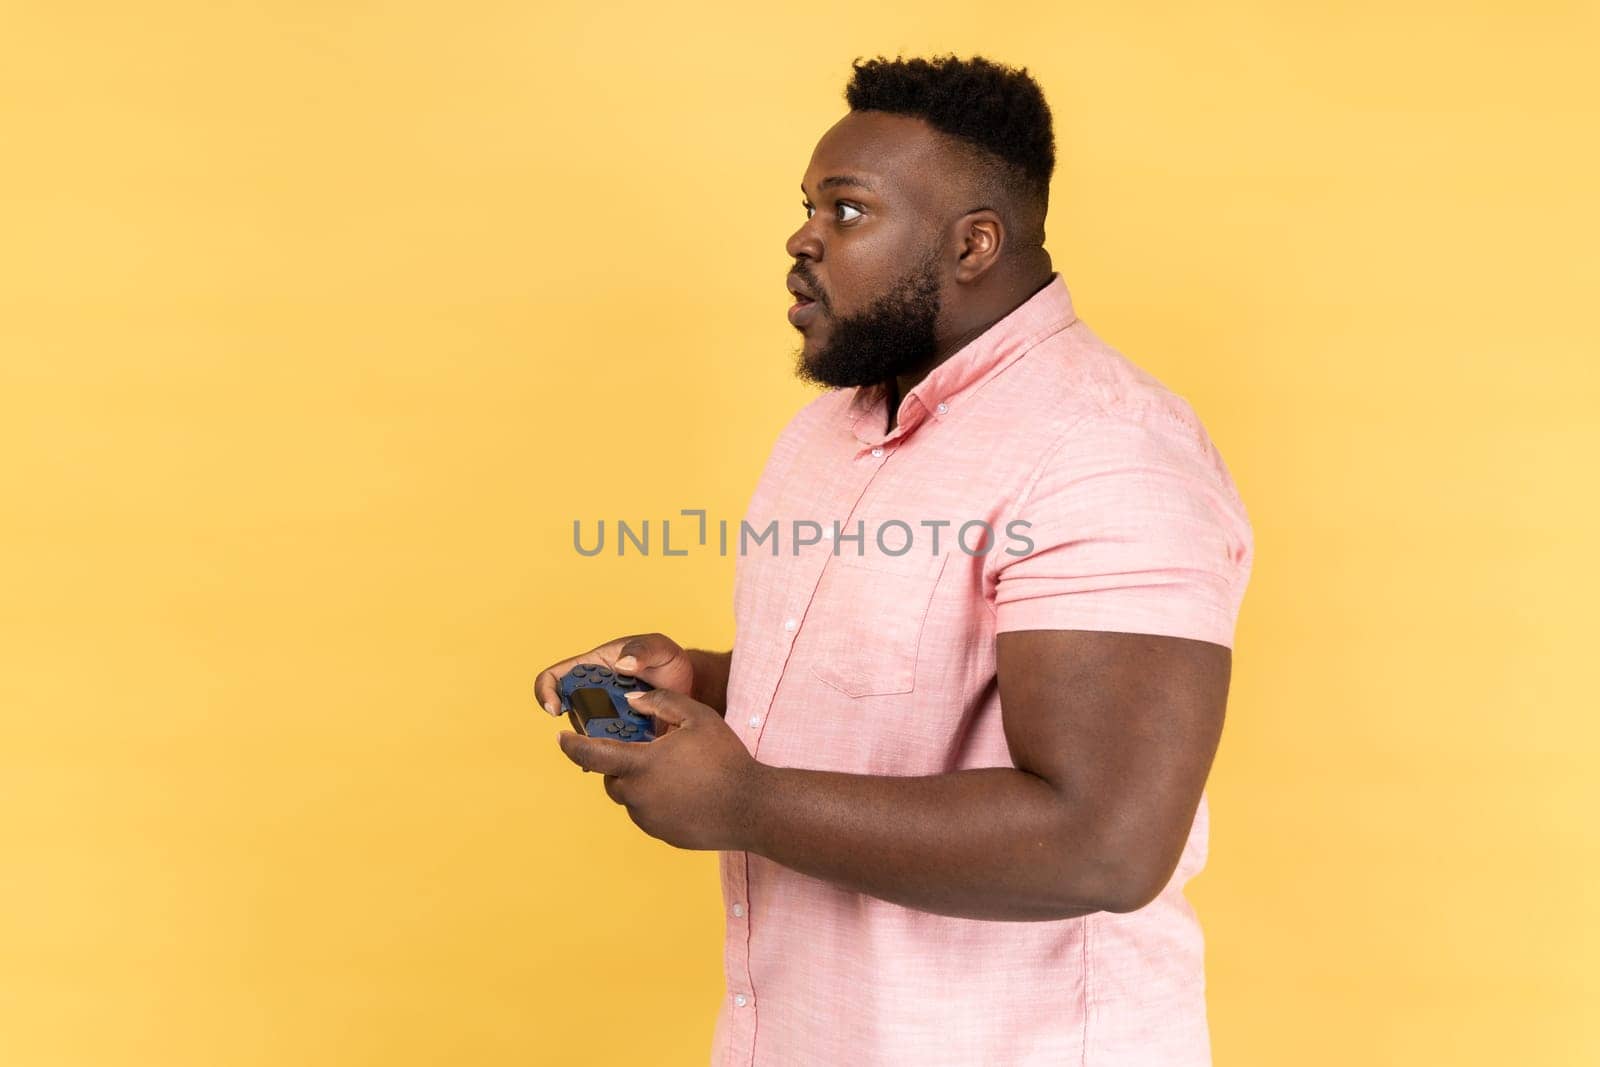 Side view of man wearing pink shirt holding in hands gamepad joystick, playing video games with big eyes and amazed facial expression. Indoor studio shot isolated on yellow background.